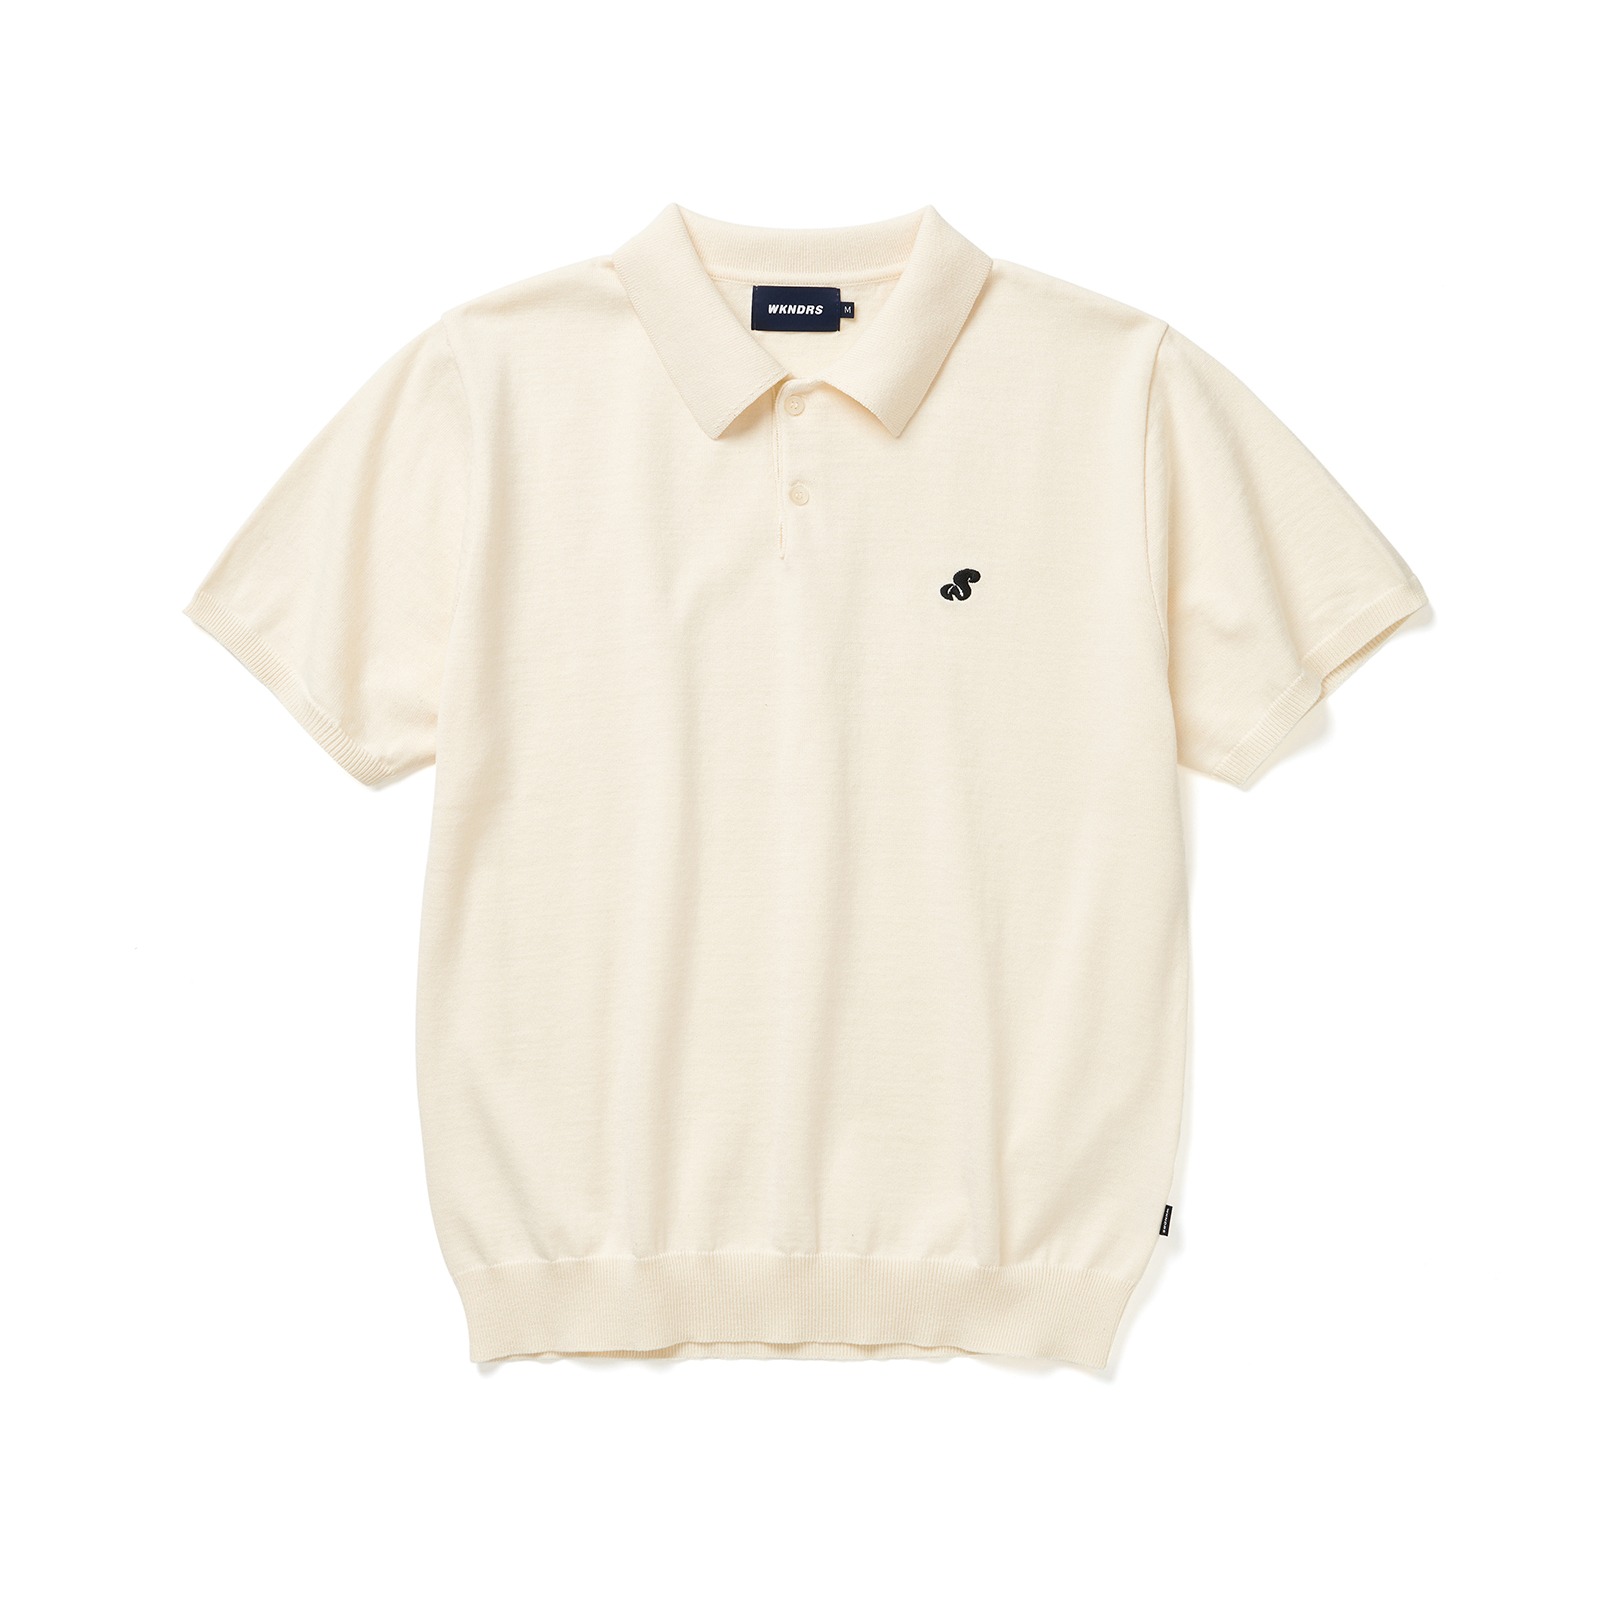 WS KNITTED PIQUE SHIRT (IVORY)